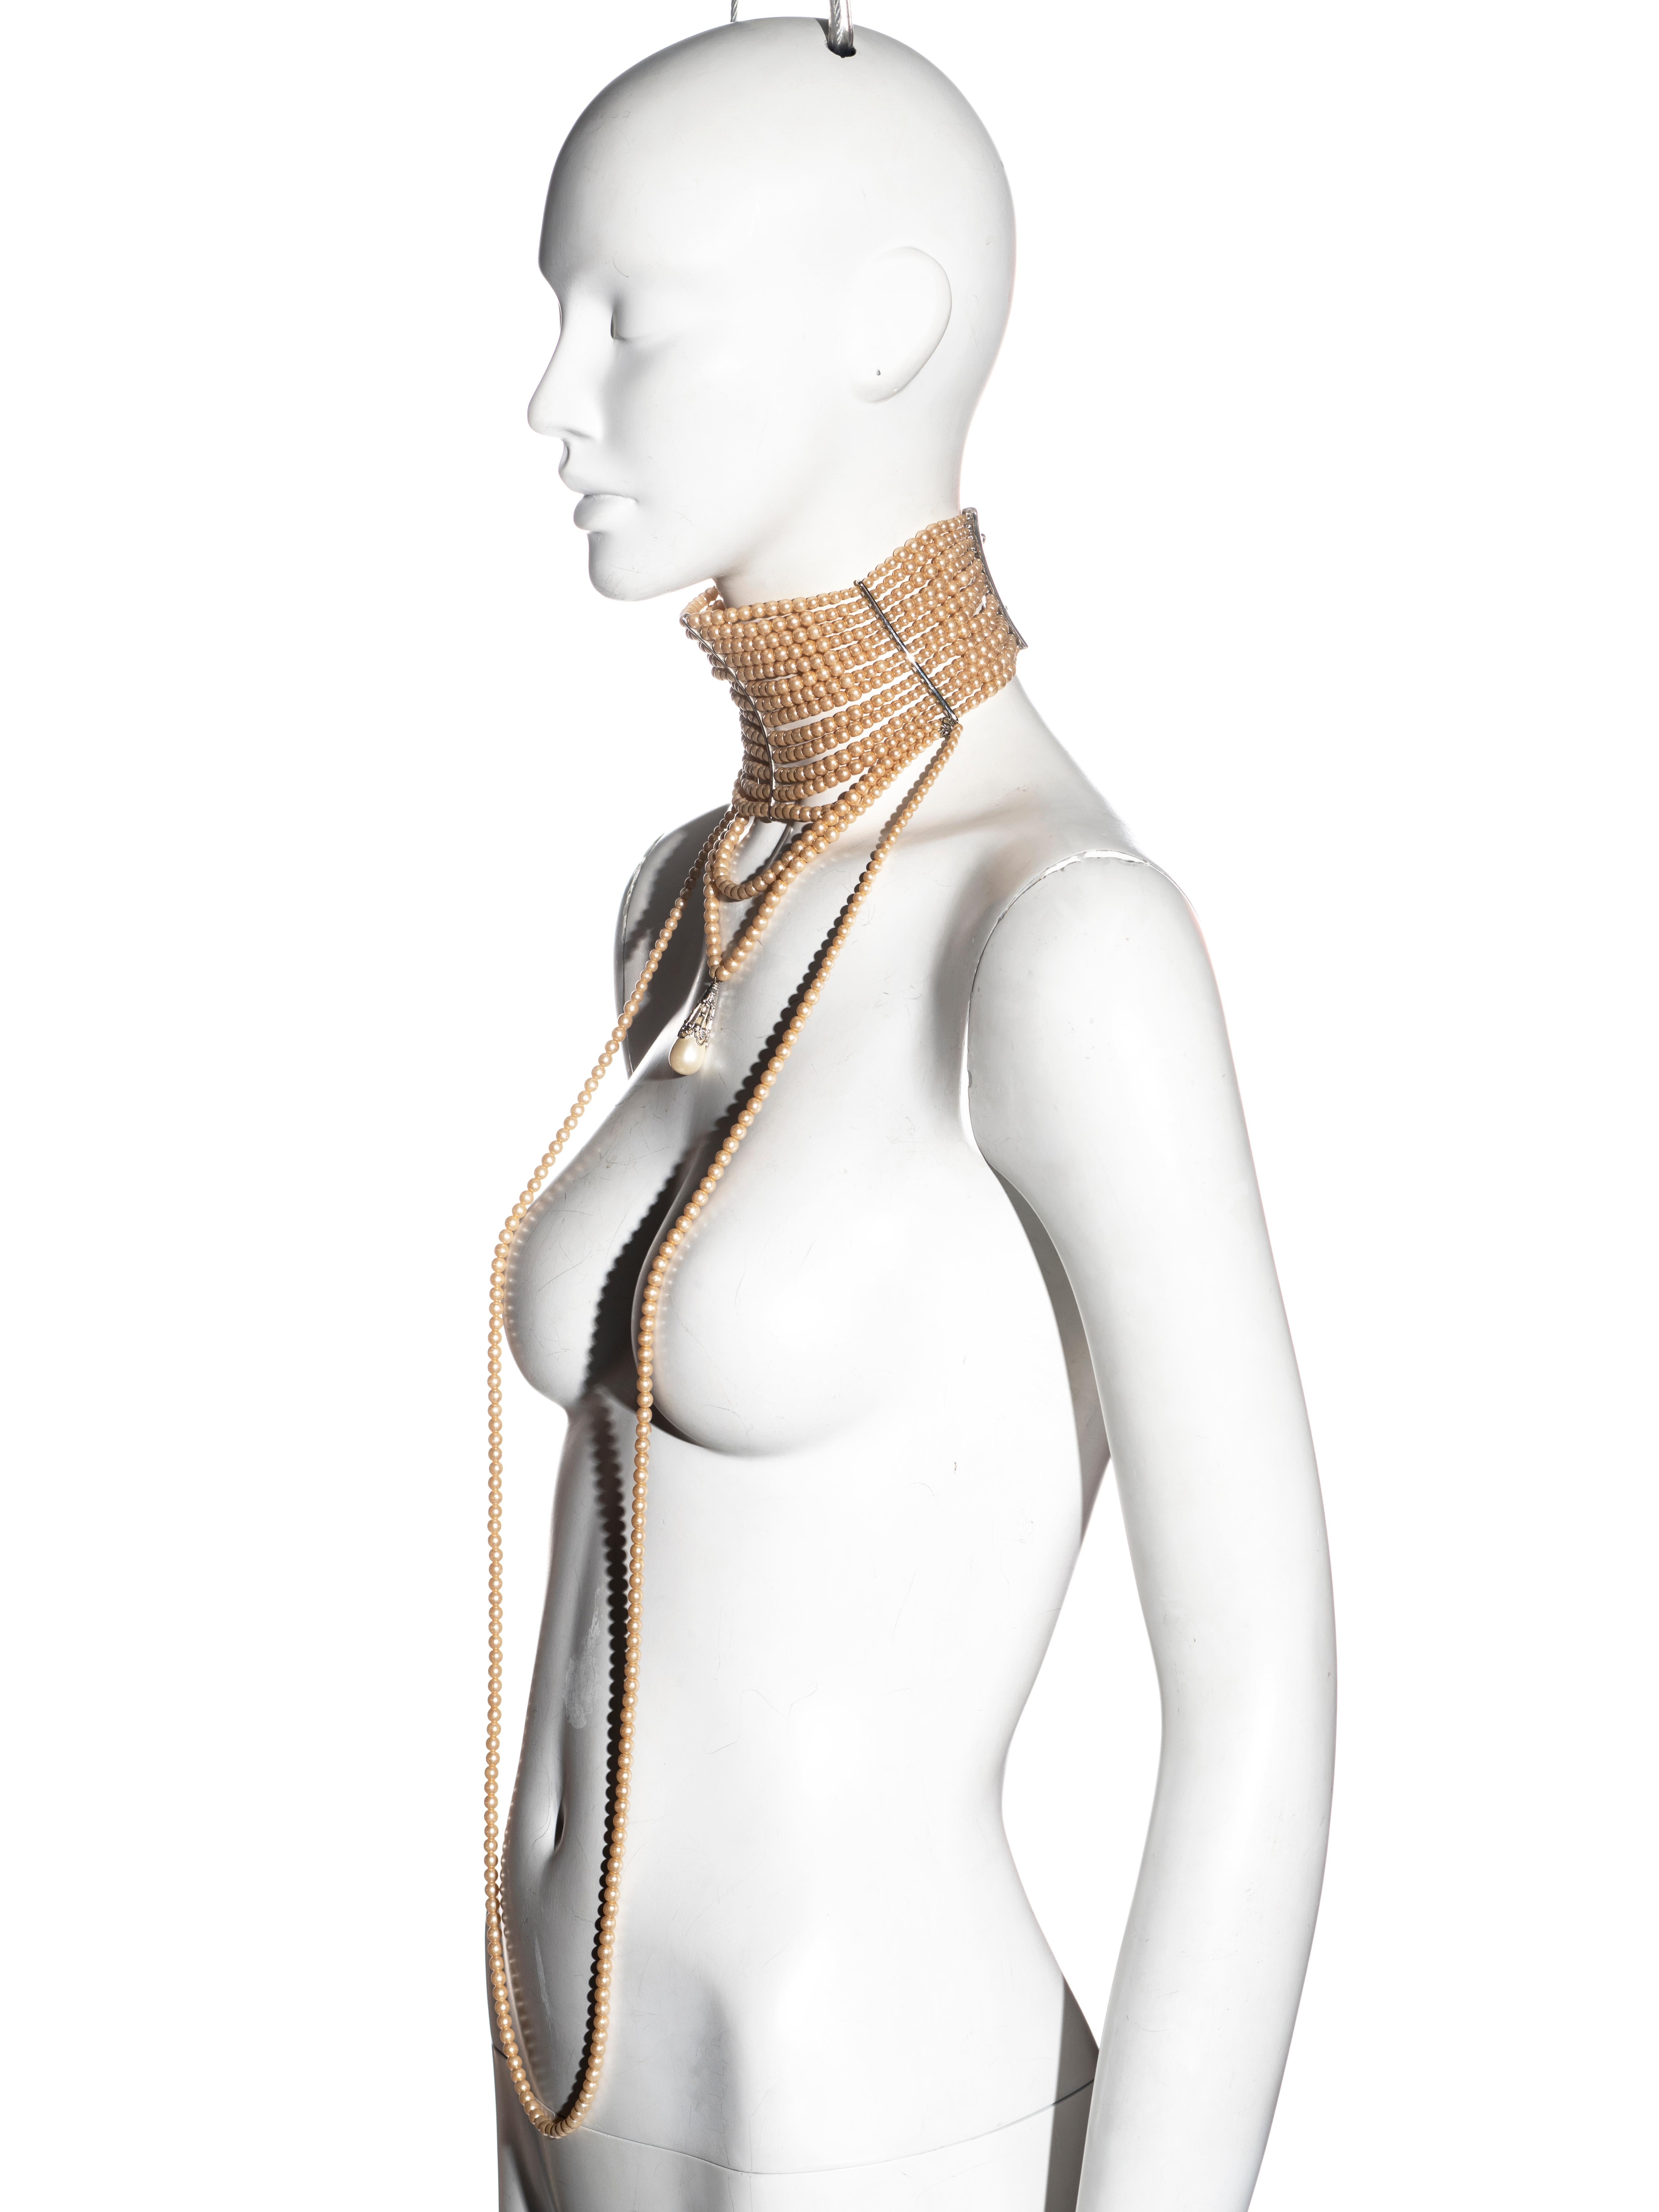 Christian Dior by John Galliano pearl choker necklace, ss 1998 2